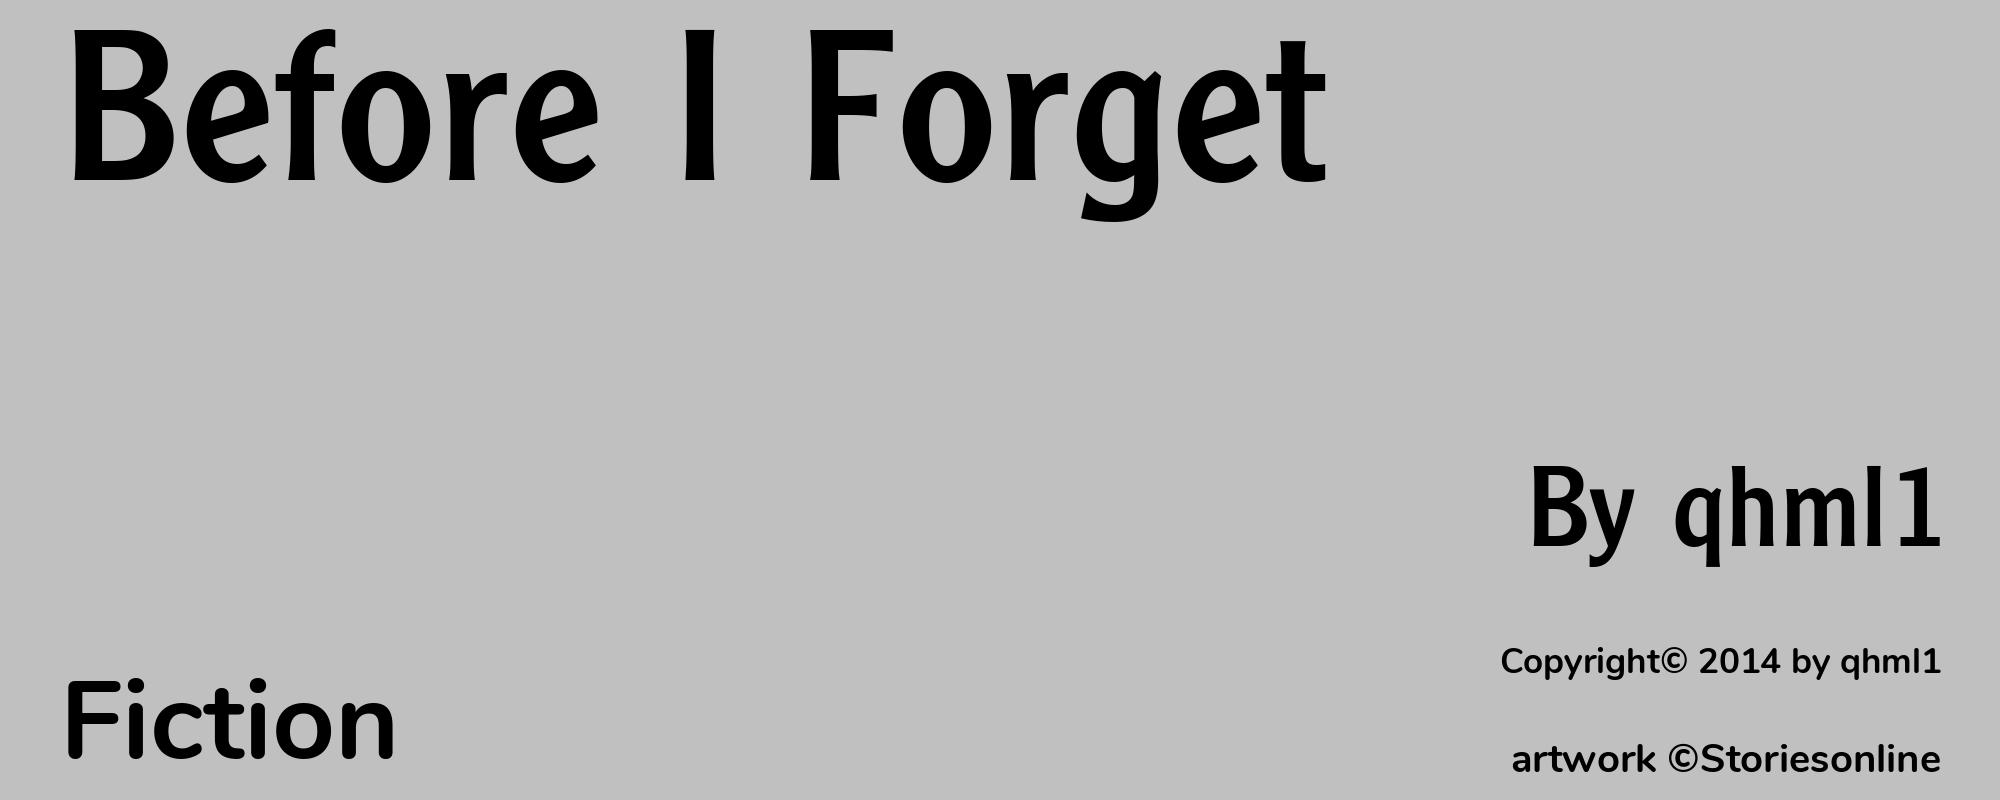 Before I Forget - Cover